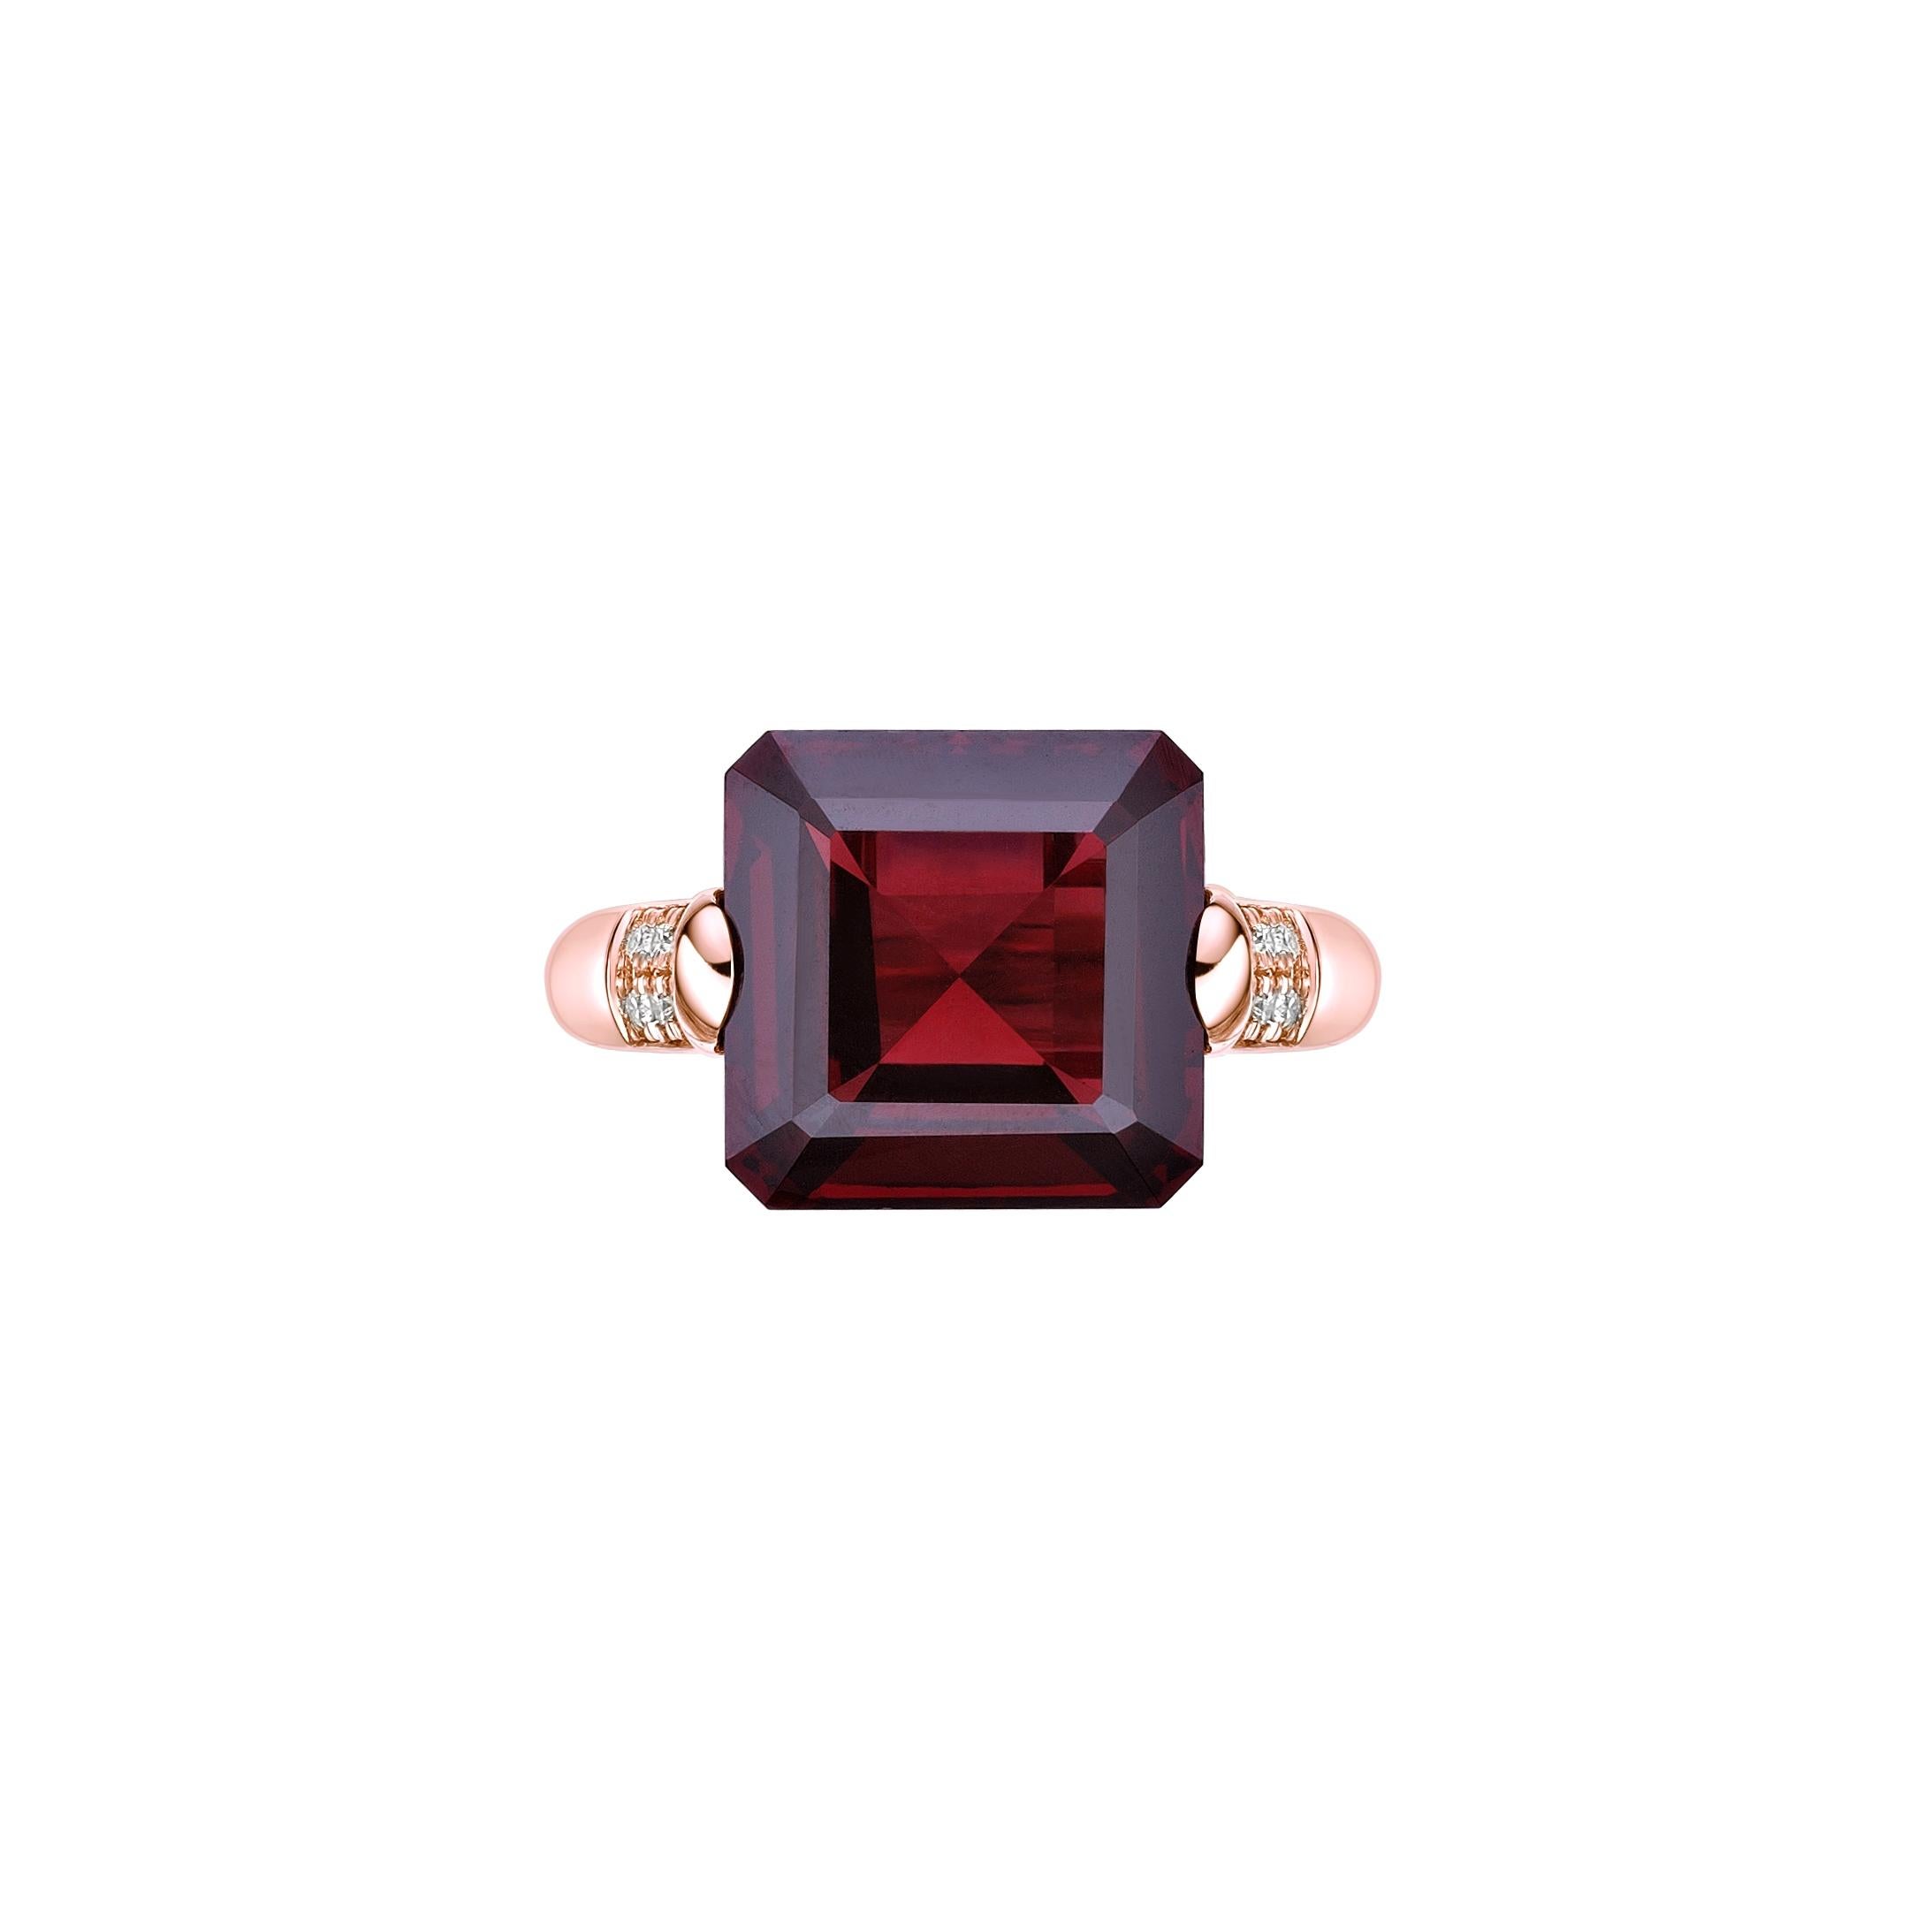 Contemporary 11.15 Carat Red Garnet Fancy Ring in 18Karat Rose Gold with White Diamond. For Sale